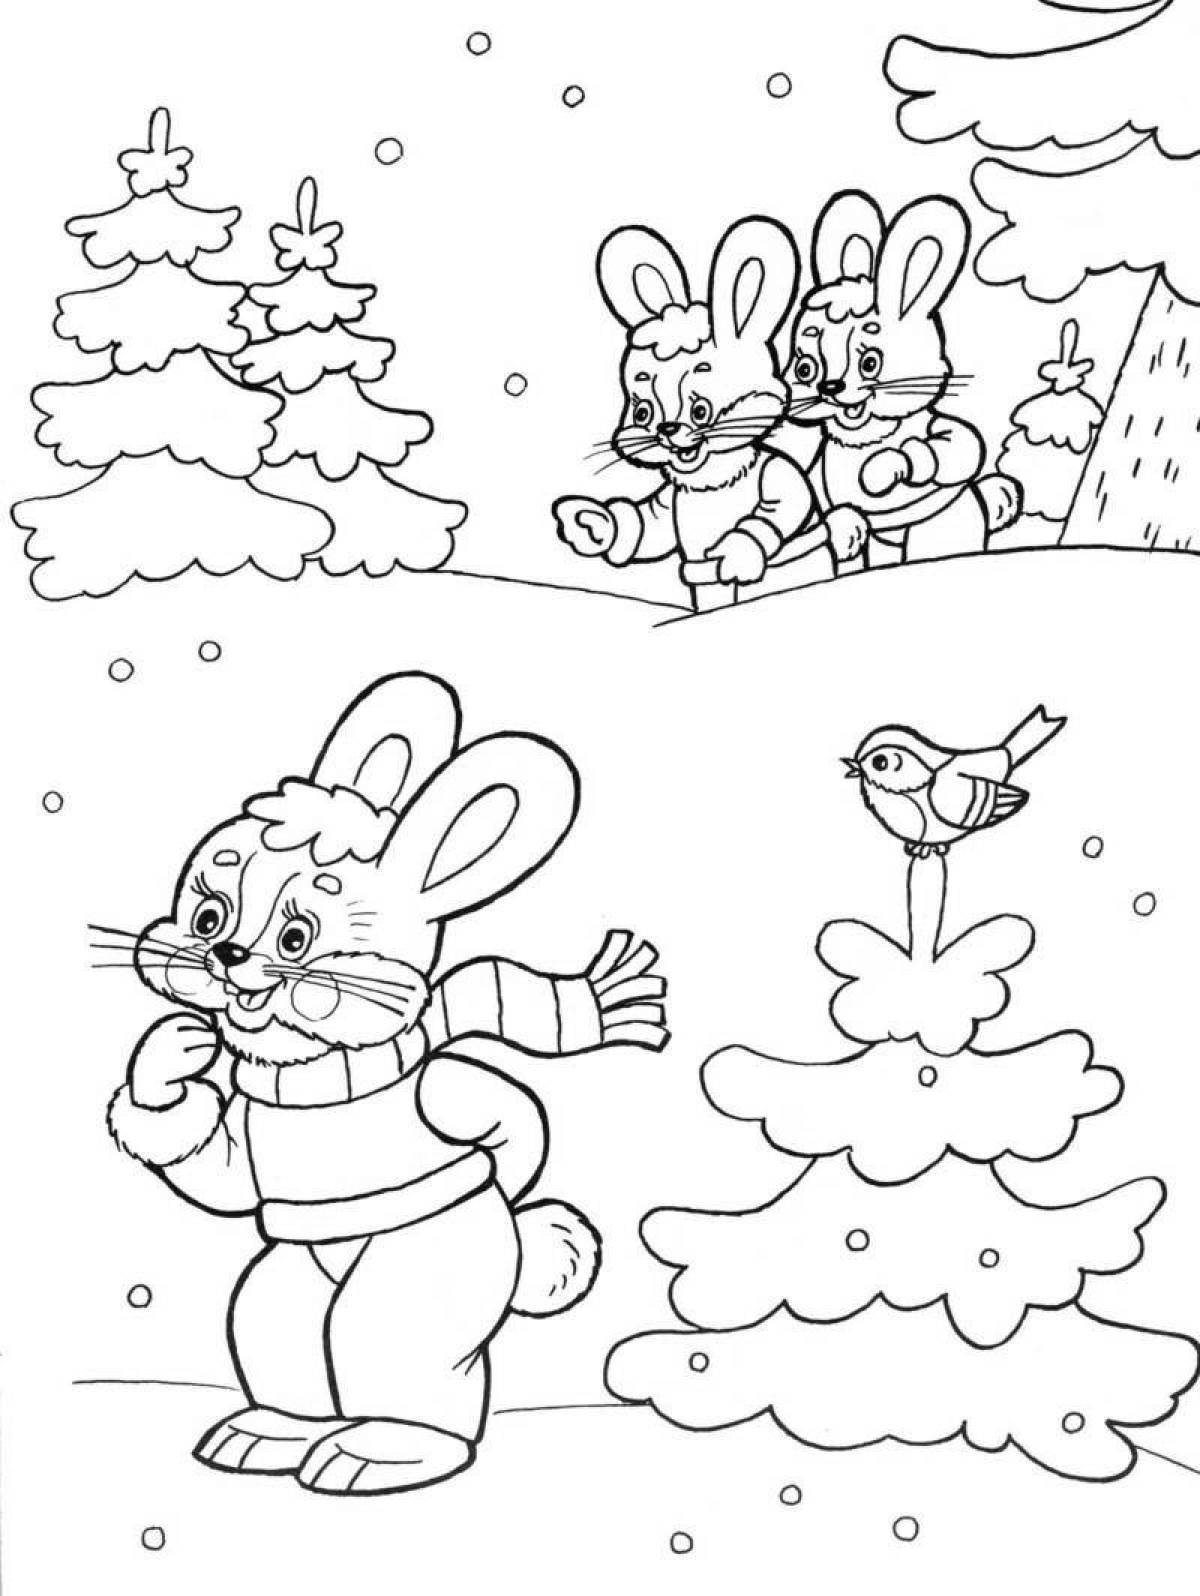 Adorable winter scene coloring page